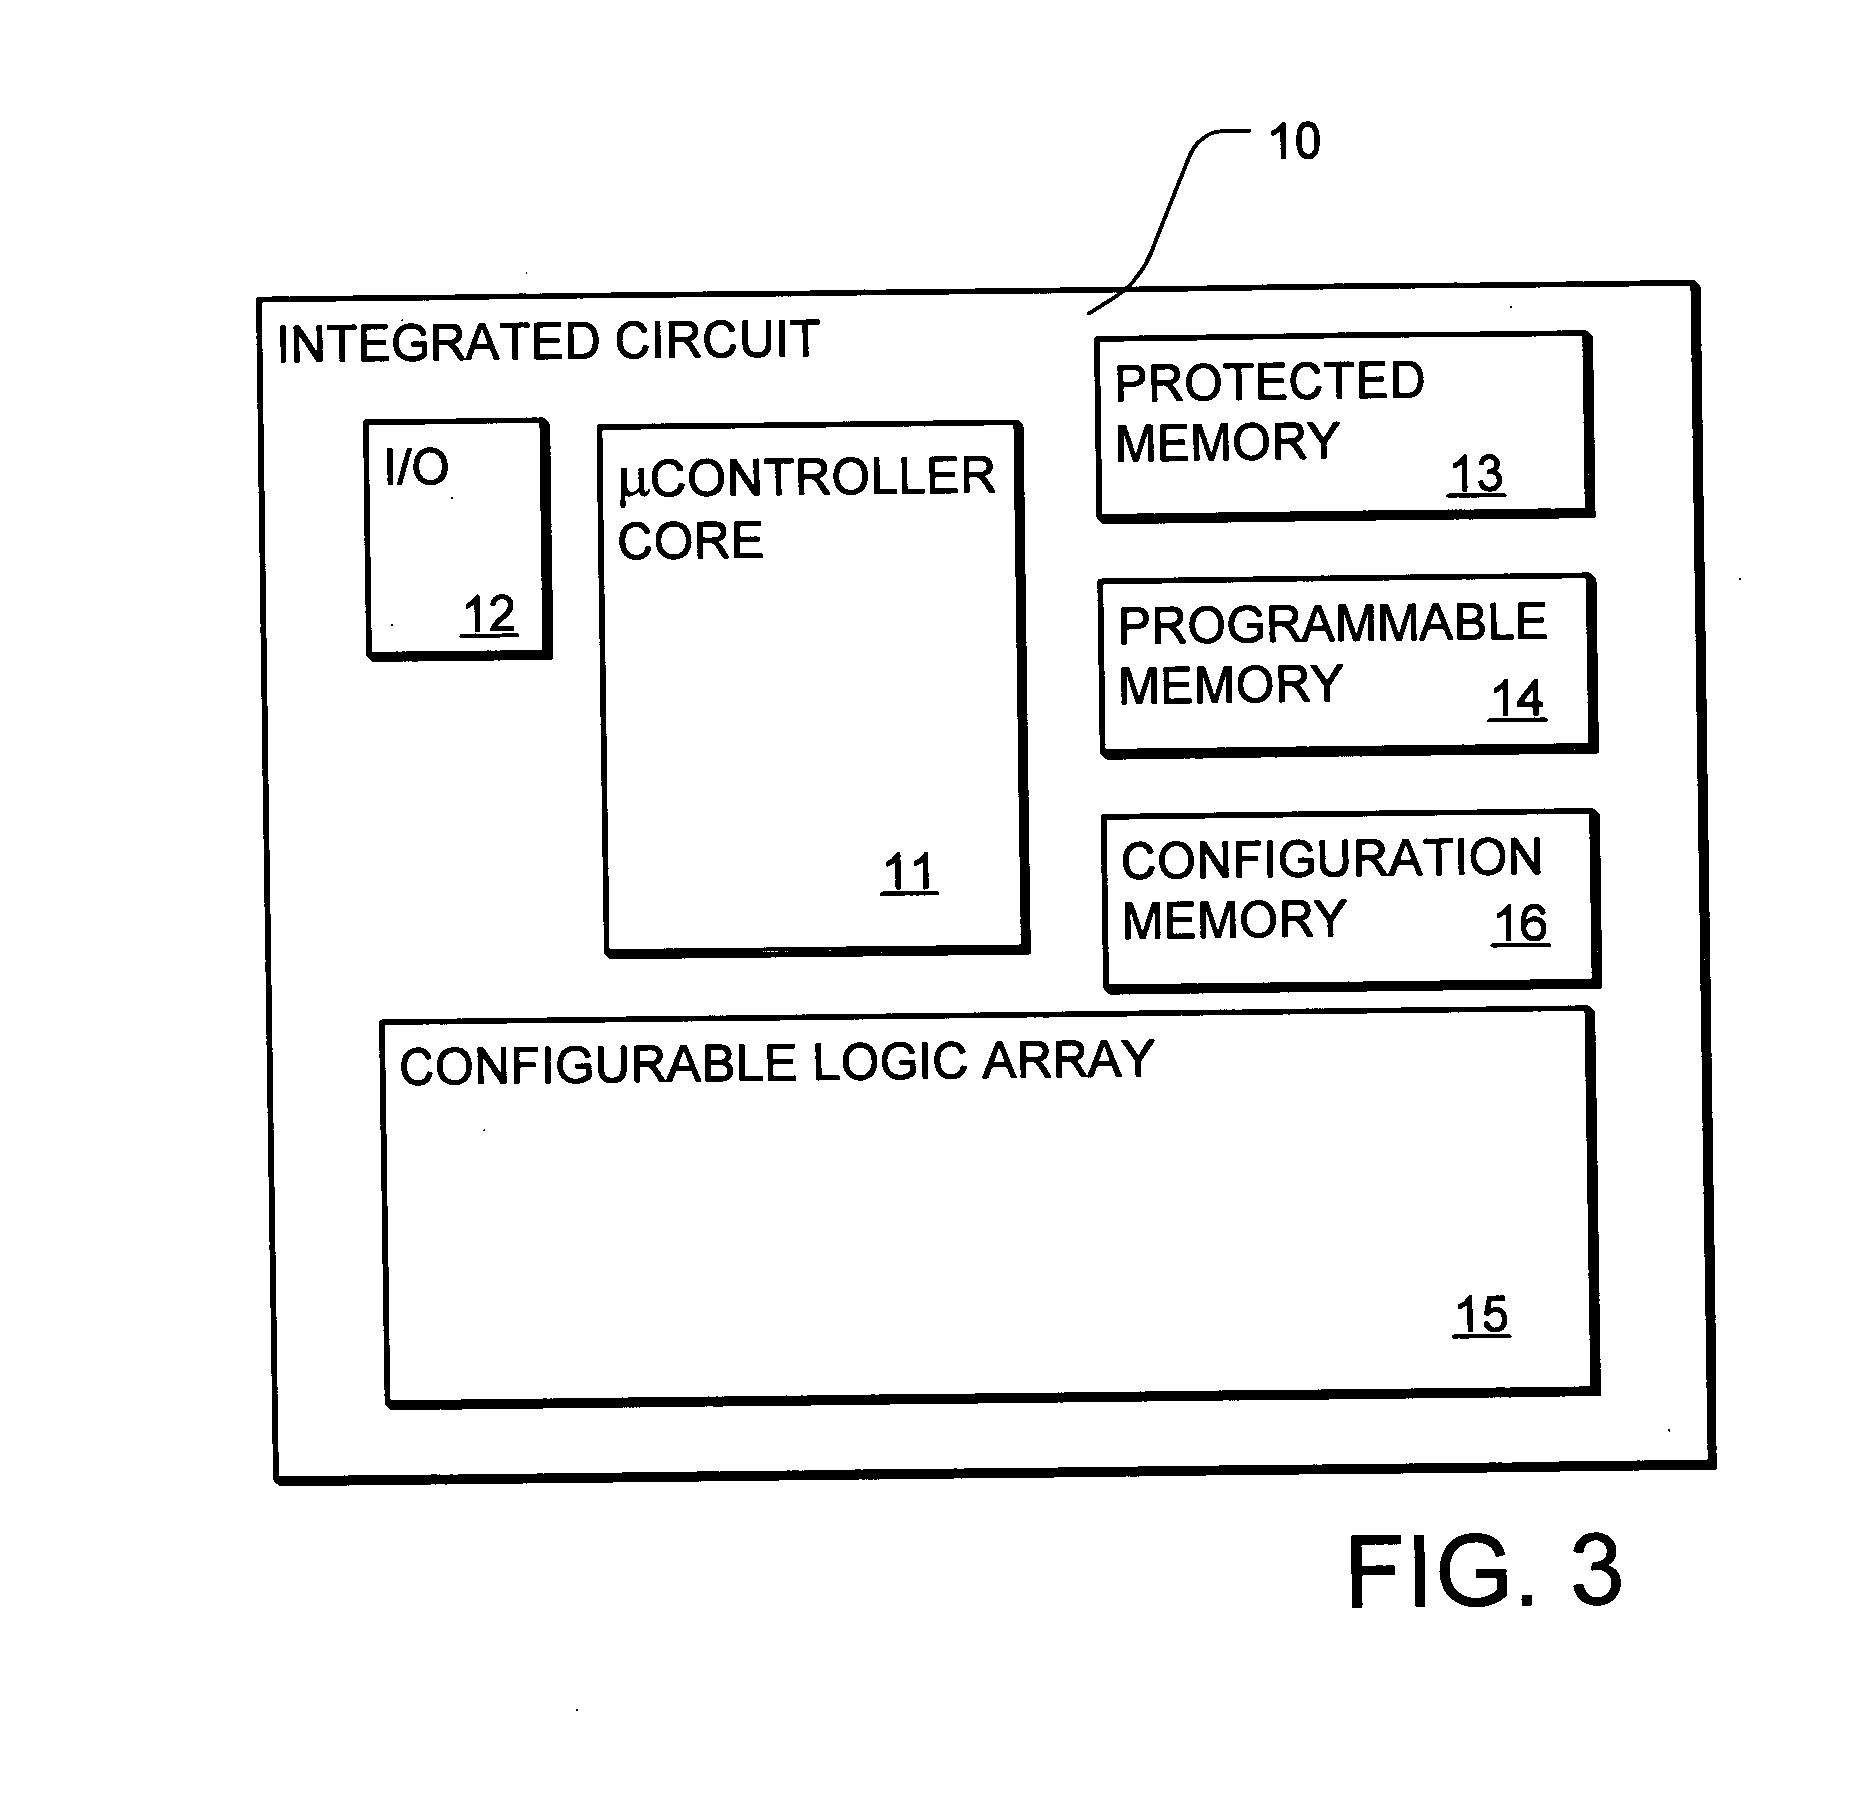 In-circuit configuration architecture with configuration on initialization function for embedded configurable logic array